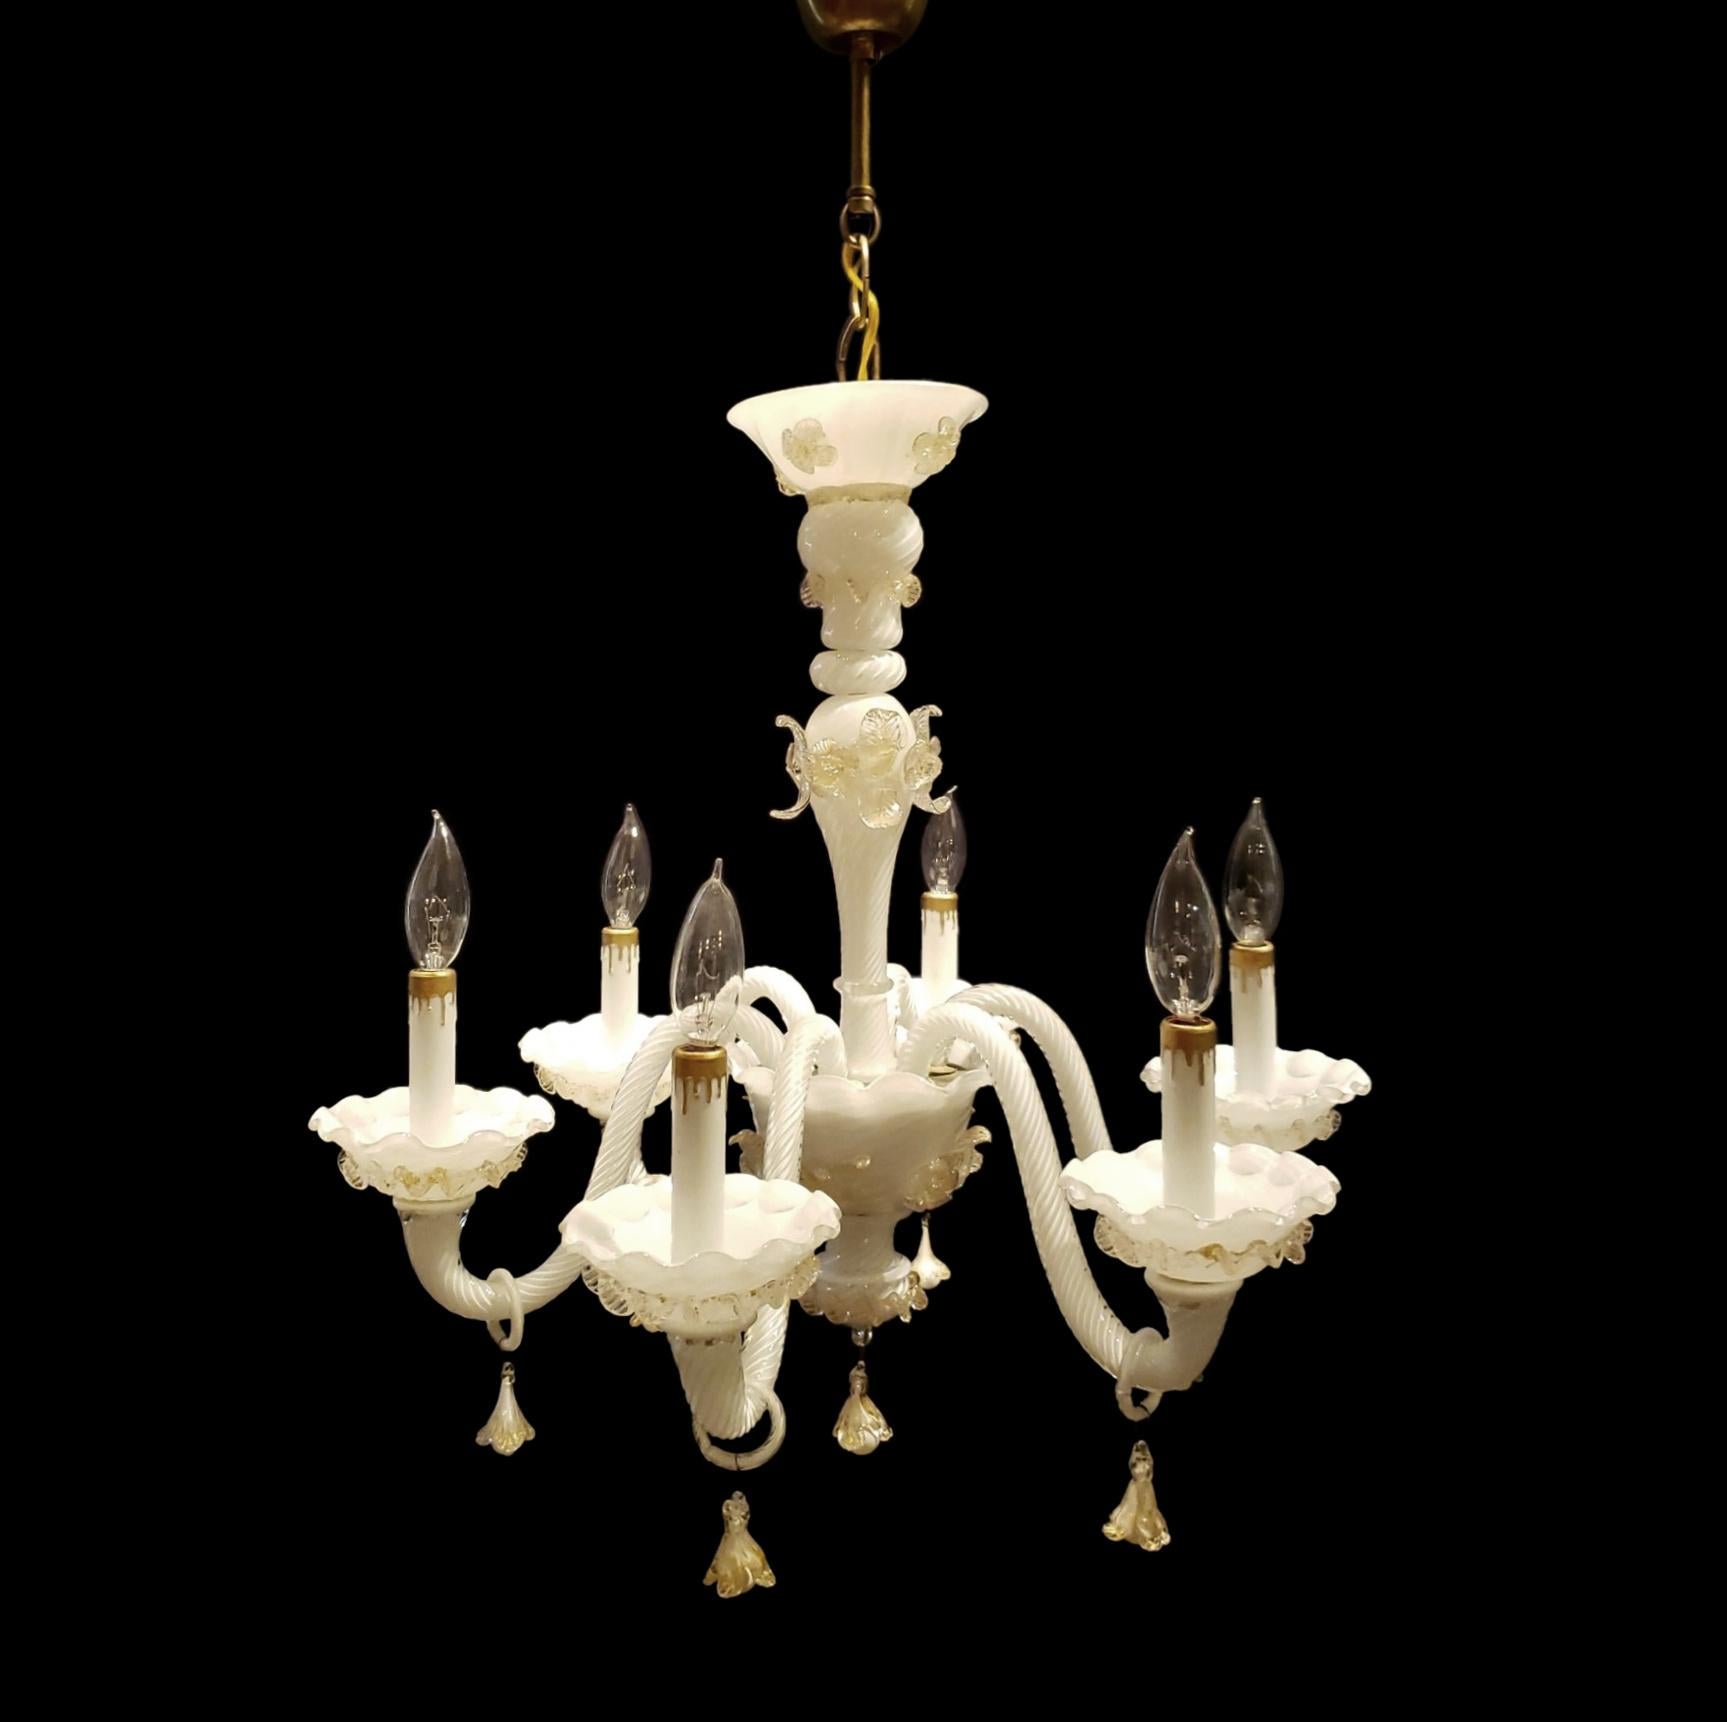 This 20th Century Murano glass chandelier with white with gold accents features 6 S shaped arms. This comes rewired and ready to install. Ships disassembled. Cleaned and restored. Please note, this item is located in our Scranton, PA location.